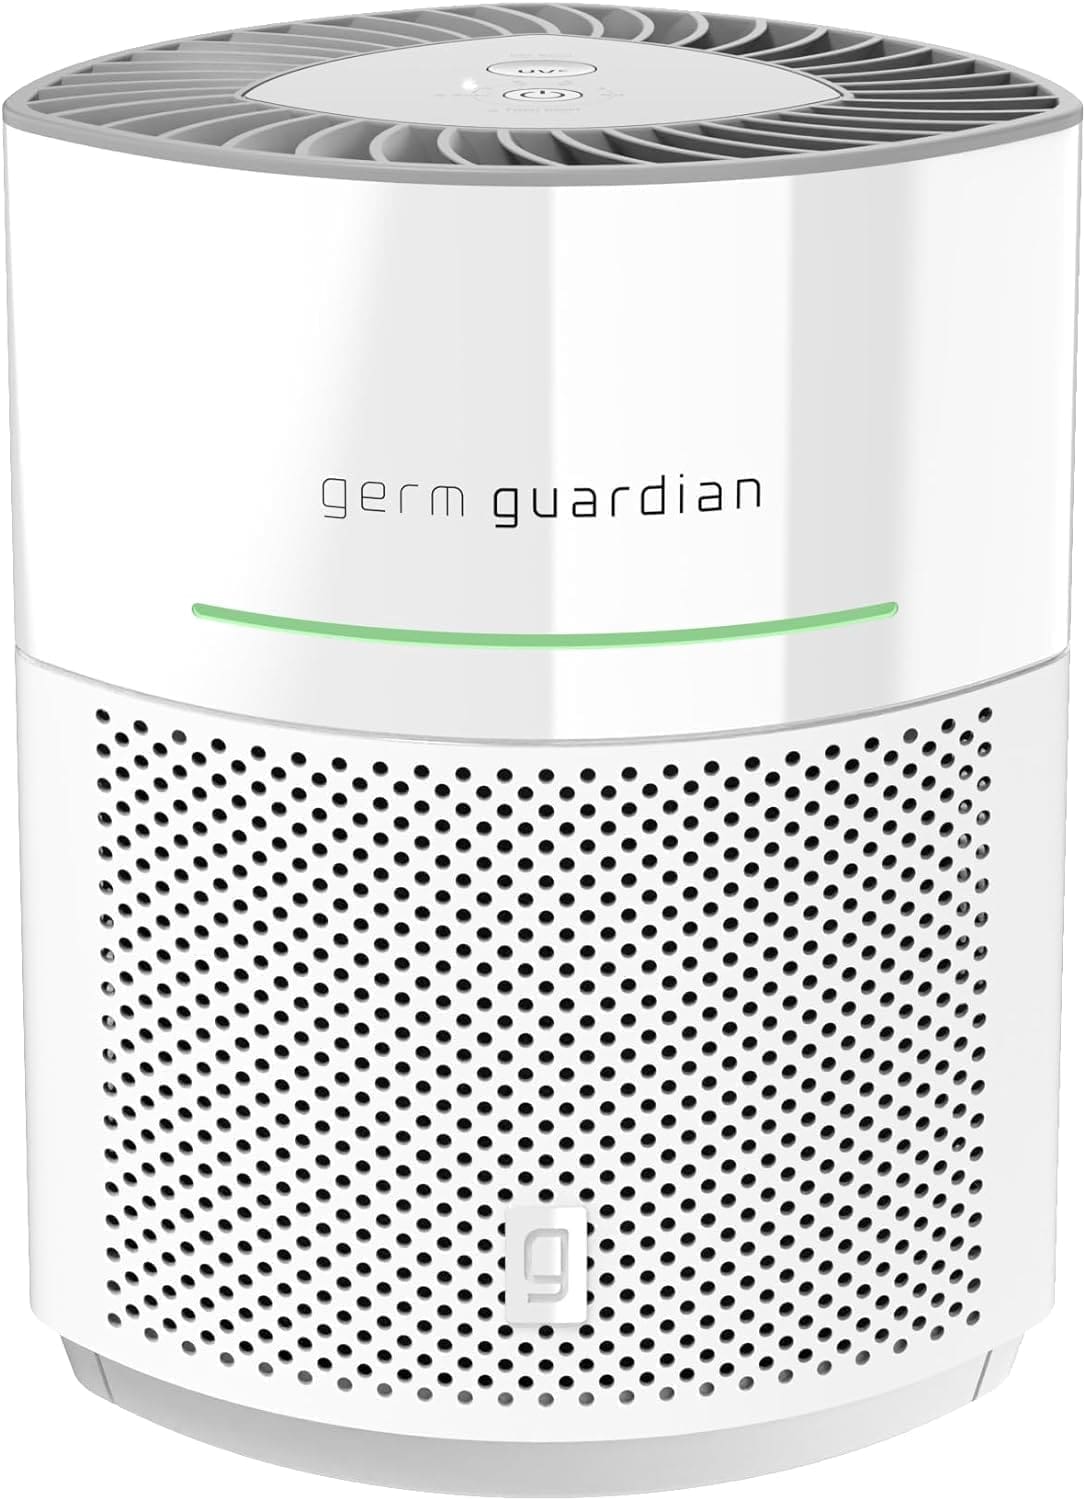 germguardian airsafe intelligent air purifier review